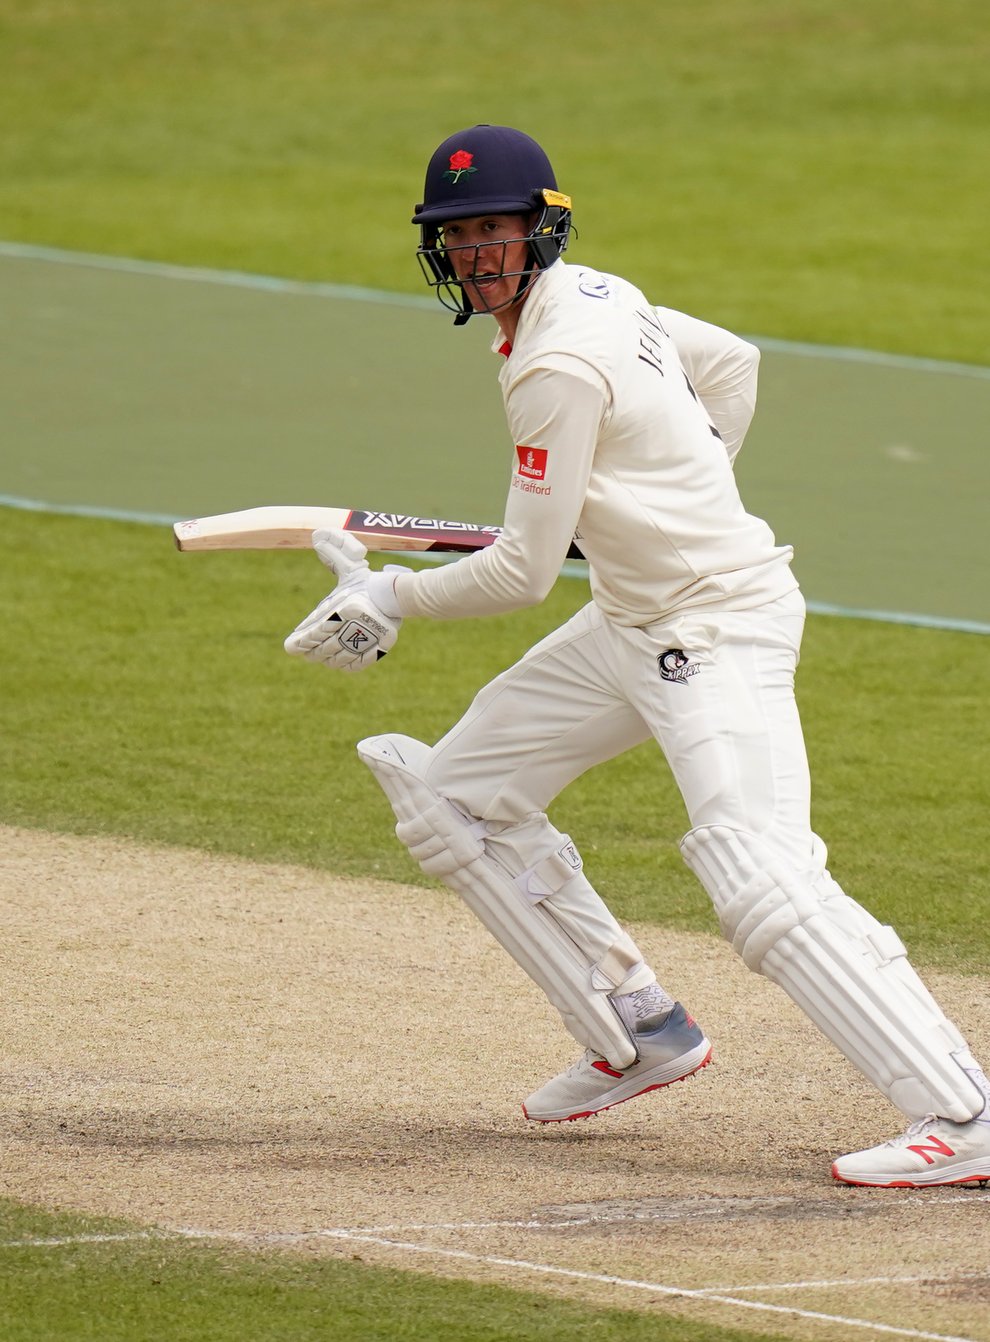 Lancashire’s Keaton Jennings scored 132 on day one of the Roses clash with Yorkshire at Emerald Headingley (Adam Davy/PA).